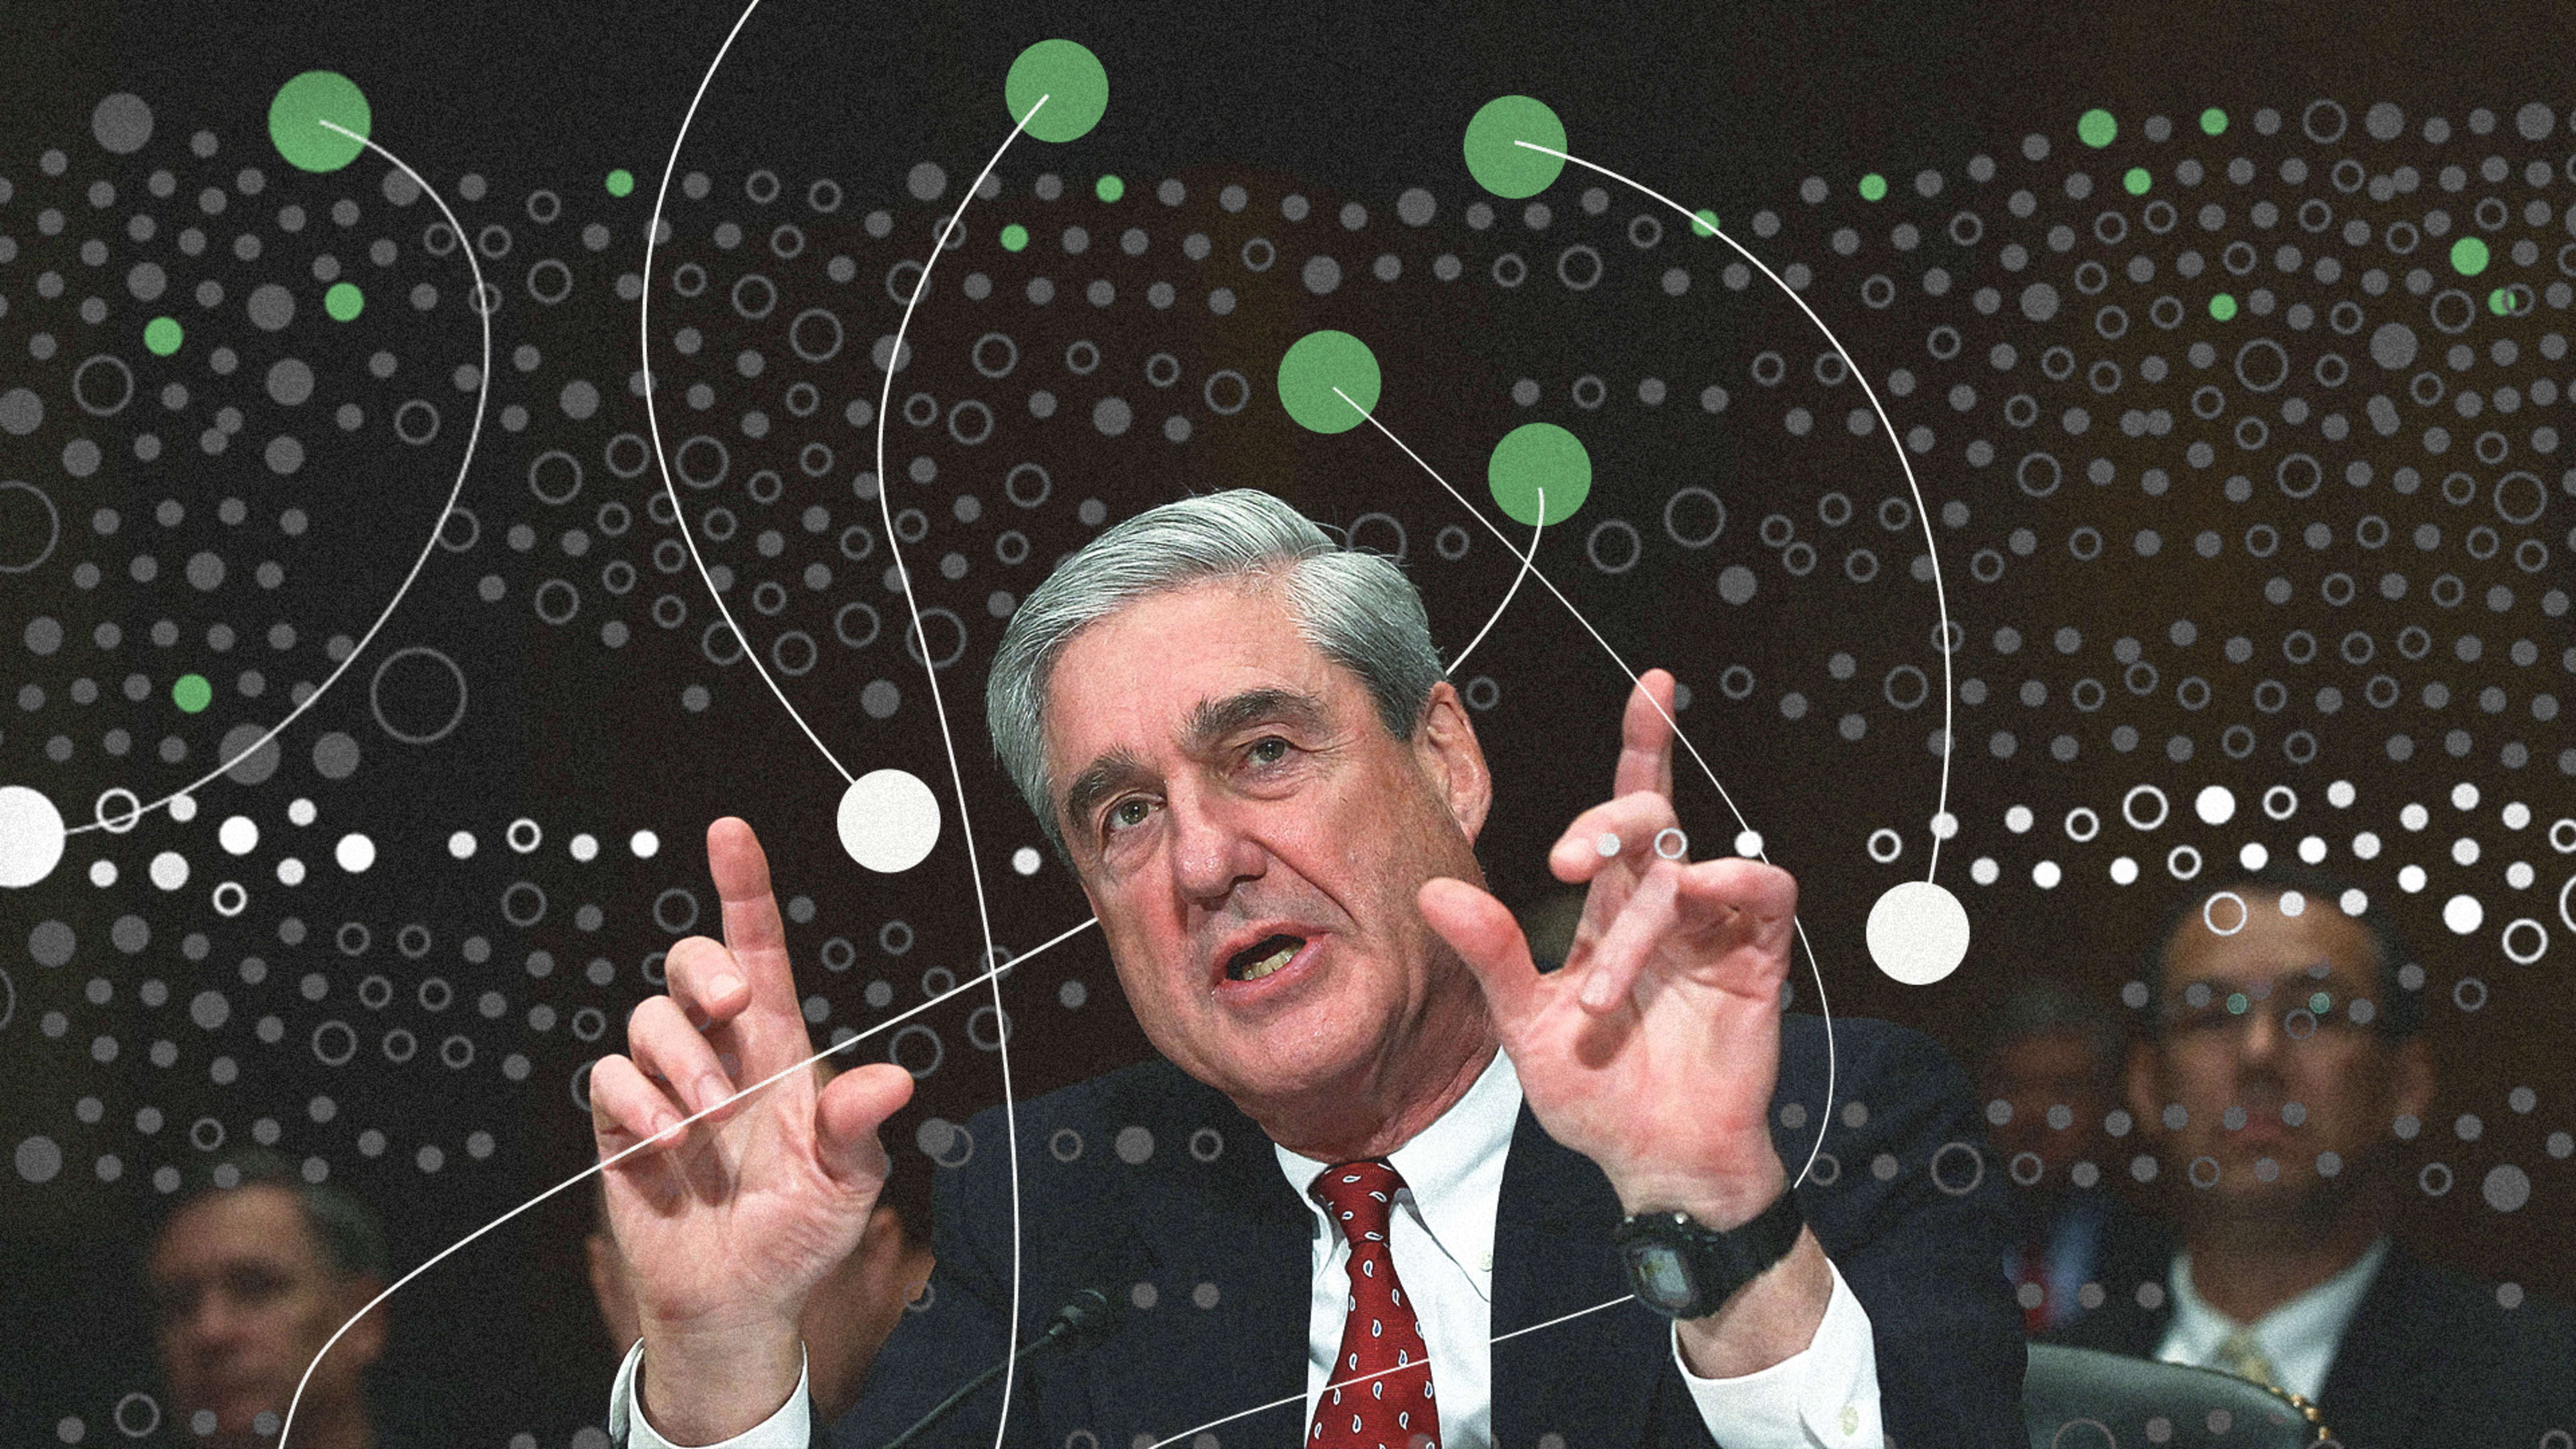 The stunningly complex Mueller investigation, visualized